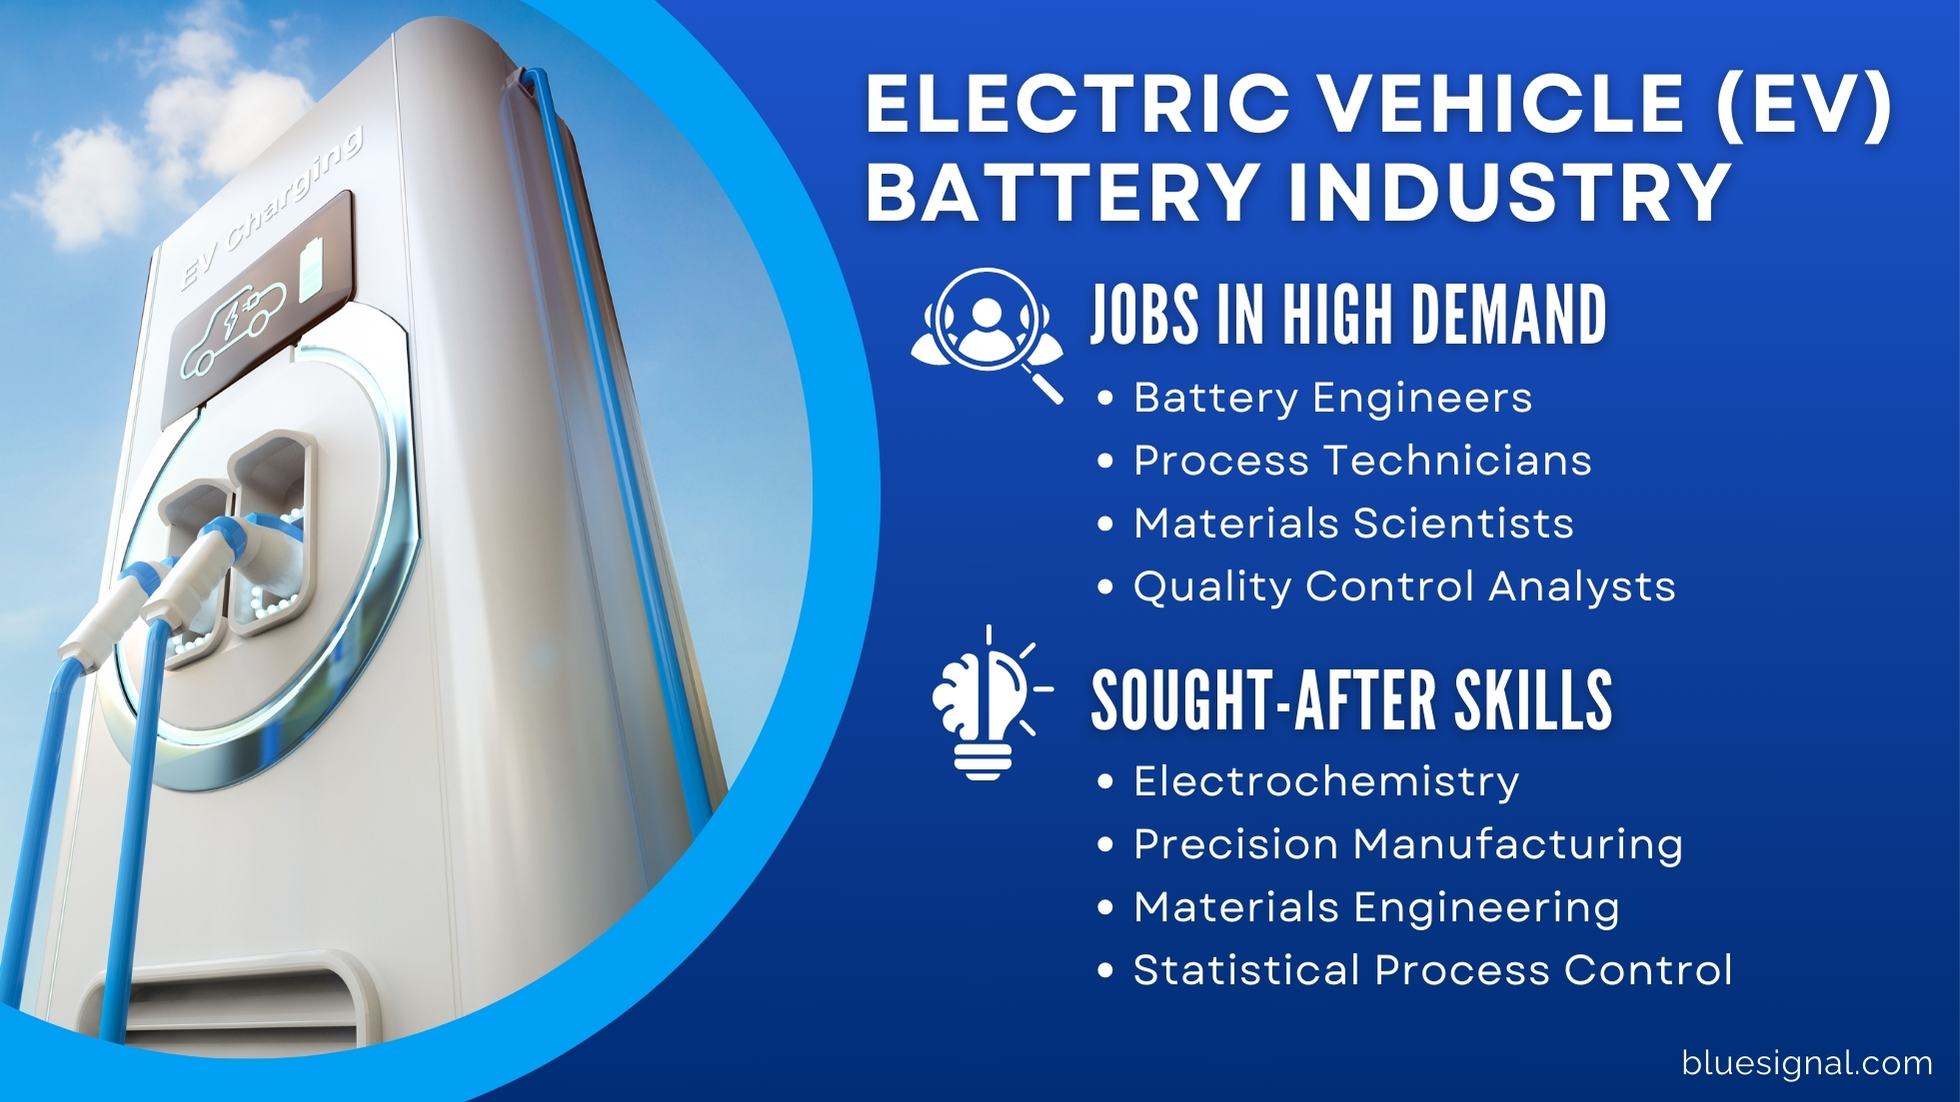 "An electric vehicle (EV) charging station with a list of high-demand jobs and sought-after skills in the EV battery industry.